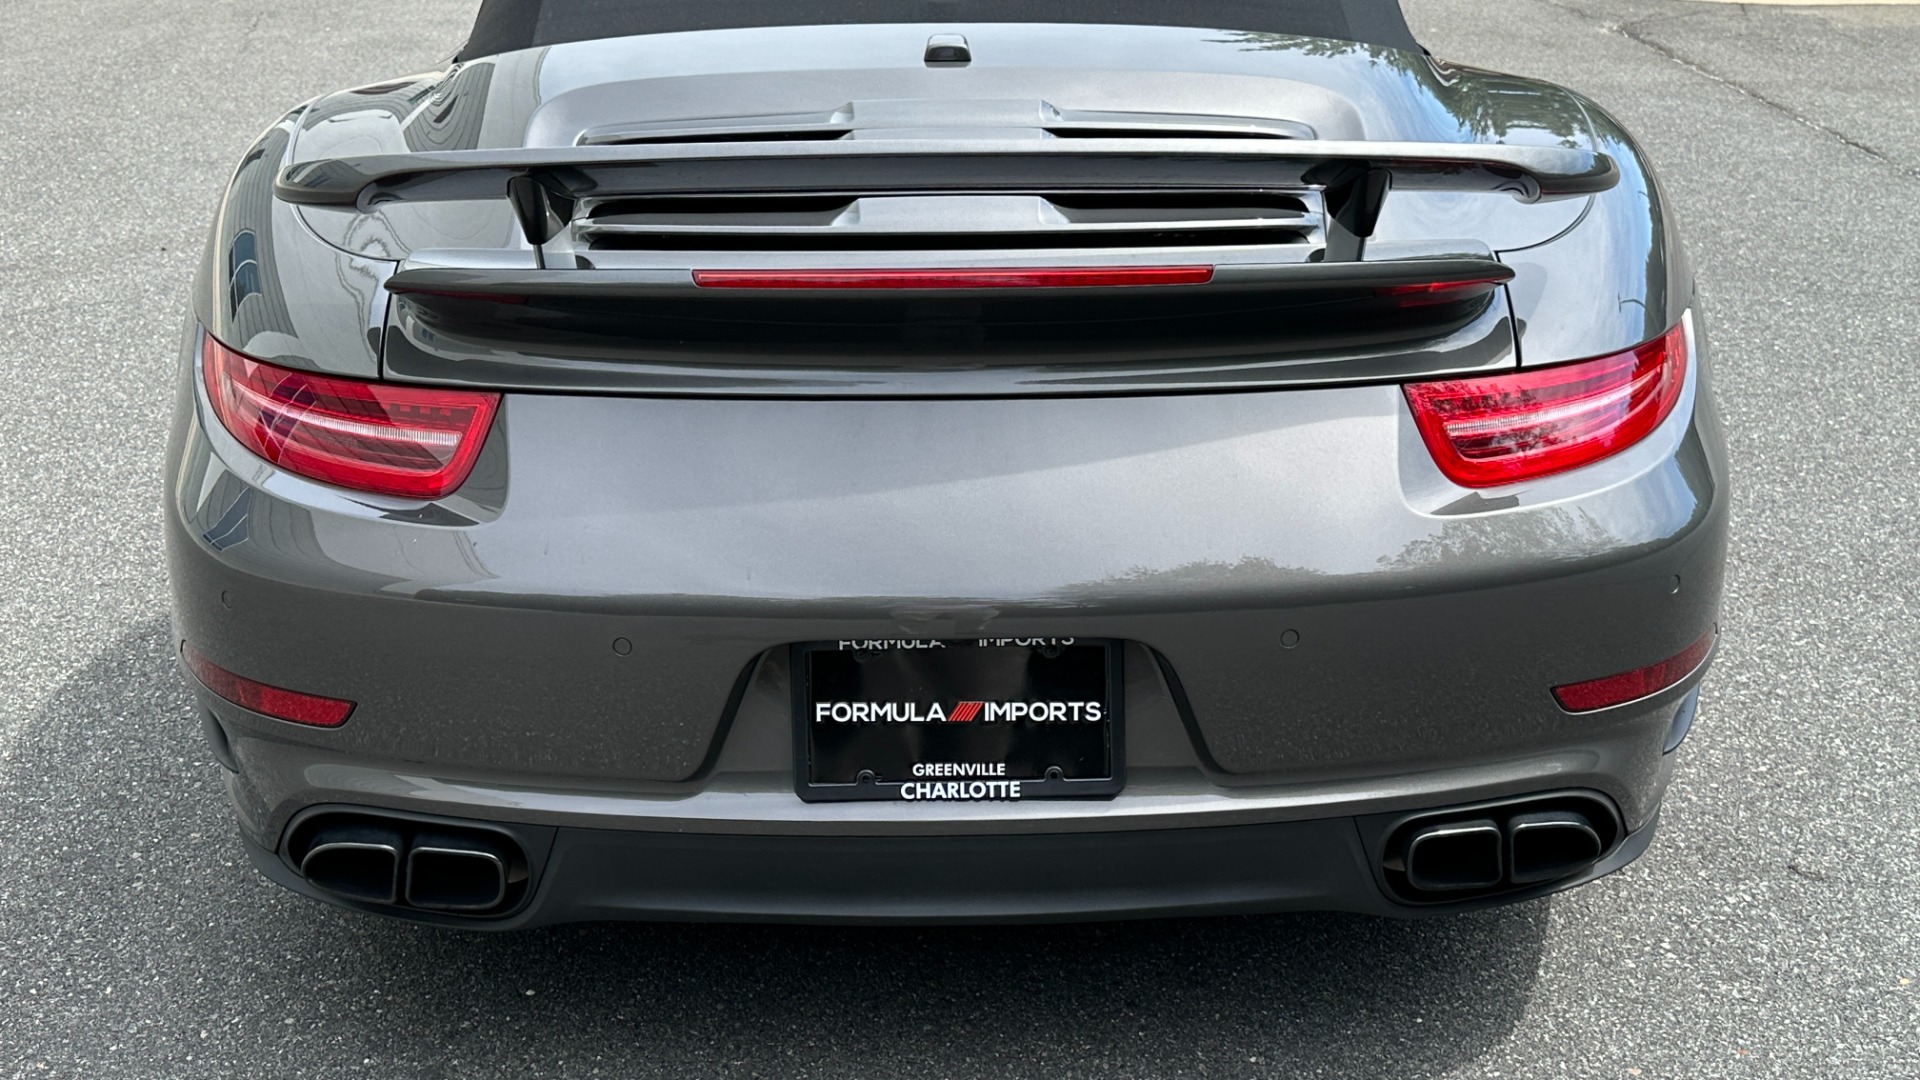 Used 2015 Porsche 911 TURBO S / BYDESIGN STAGE 4.2 POWER PACKAGE / $30K IN UPGRADES / APPLE CARPL for sale $118,999 at Formula Imports in Charlotte NC 28227 8